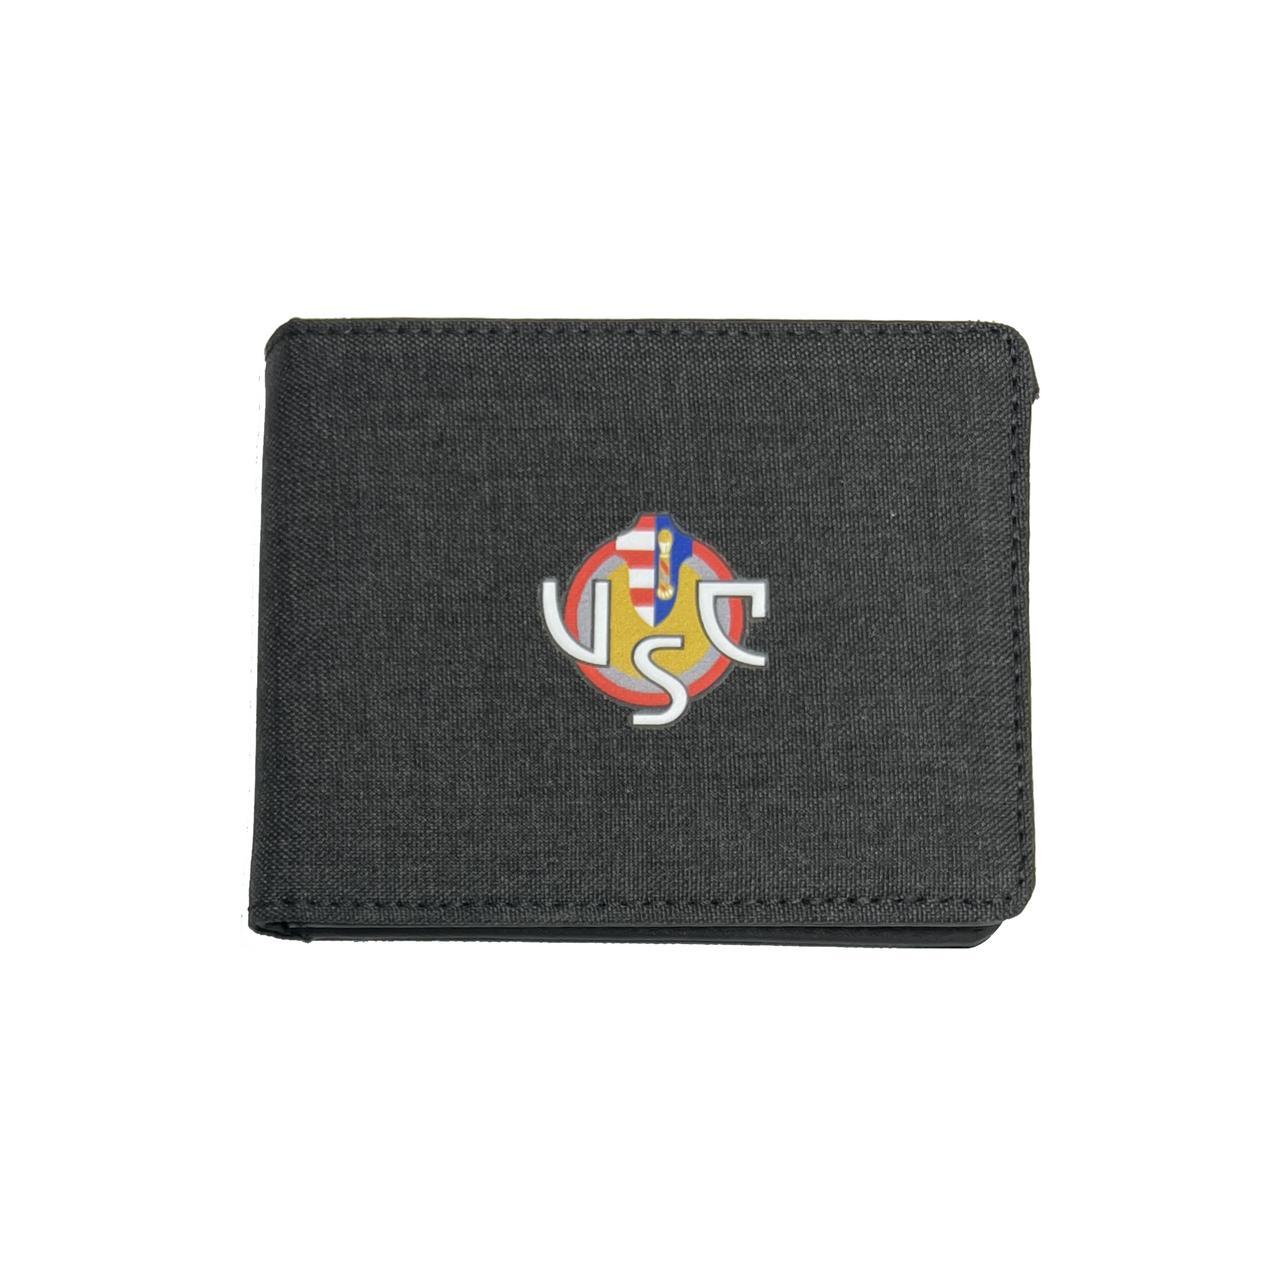 US Cremonese black wallet with RIFD logo